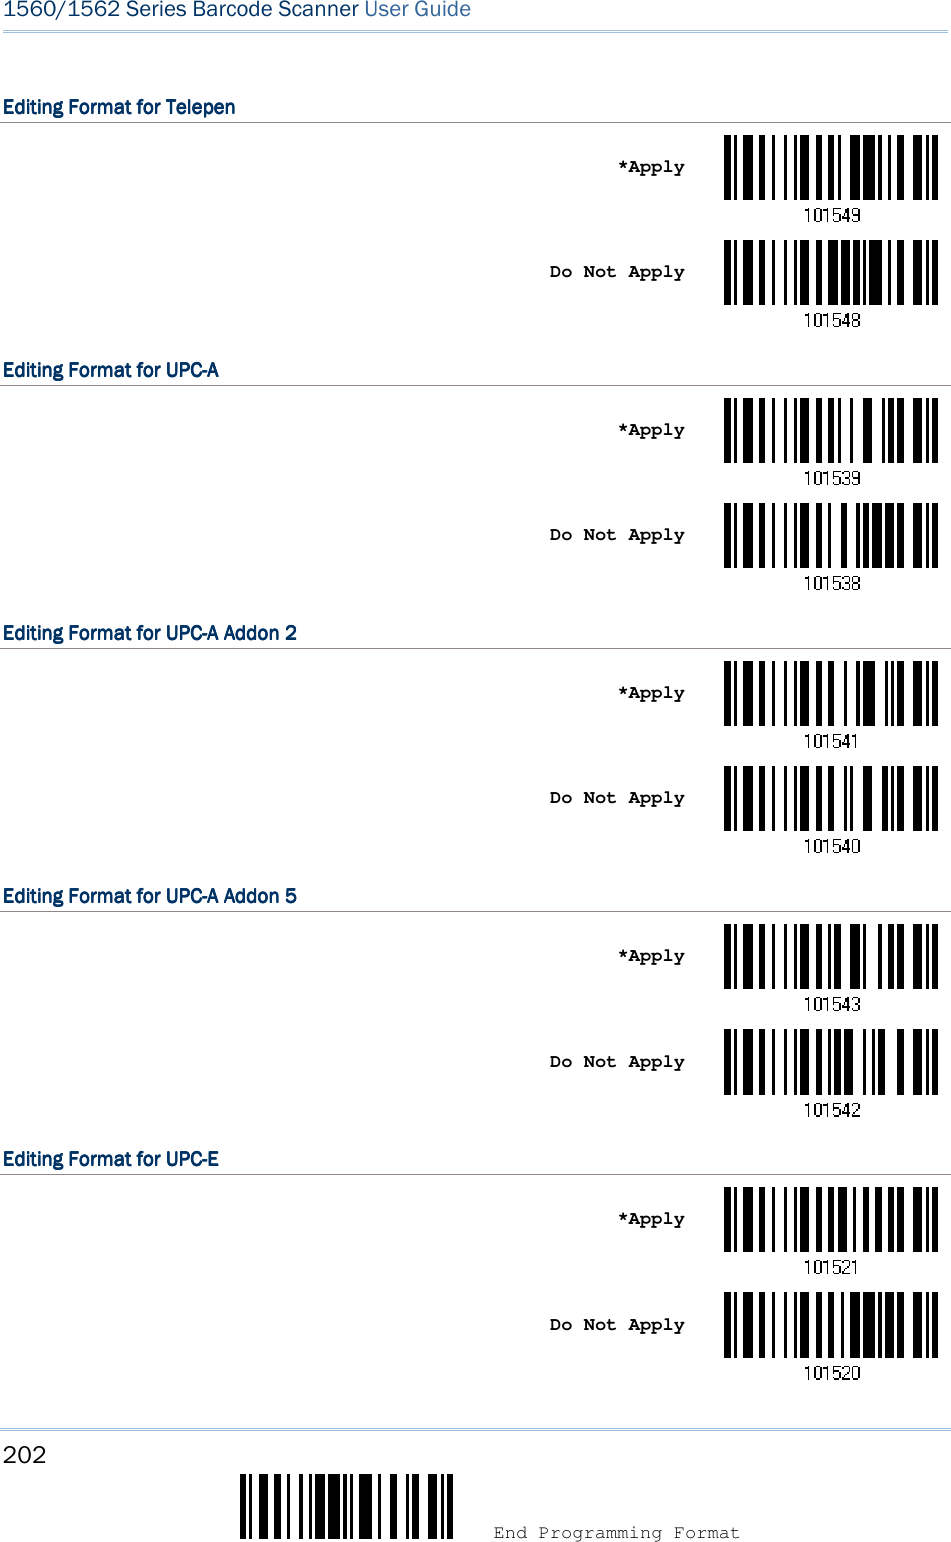 202  End Programming Format 1560/1562 Series Barcode Scanner User Guide  Editing Format for TelepenEditing Format for TelepenEditing Format for TelepenEditing Format for Telepen       *Apply     Do Not Apply  Editing Format for UPCEditing Format for UPCEditing Format for UPCEditing Format for UPC----AAAA       *Apply     Do Not Apply  Editing Format for UPCEditing Format for UPCEditing Format for UPCEditing Format for UPC----A Addon 2A Addon 2A Addon 2A Addon 2       *Apply     Do Not Apply  Editing Editing Editing Editing Format for UPCFormat for UPCFormat for UPCFormat for UPC----A Addon 5A Addon 5A Addon 5A Addon 5       *Apply     Do Not Apply  Editing Format for UPCEditing Format for UPCEditing Format for UPCEditing Format for UPC----EEEE       *Apply     Do Not Apply  